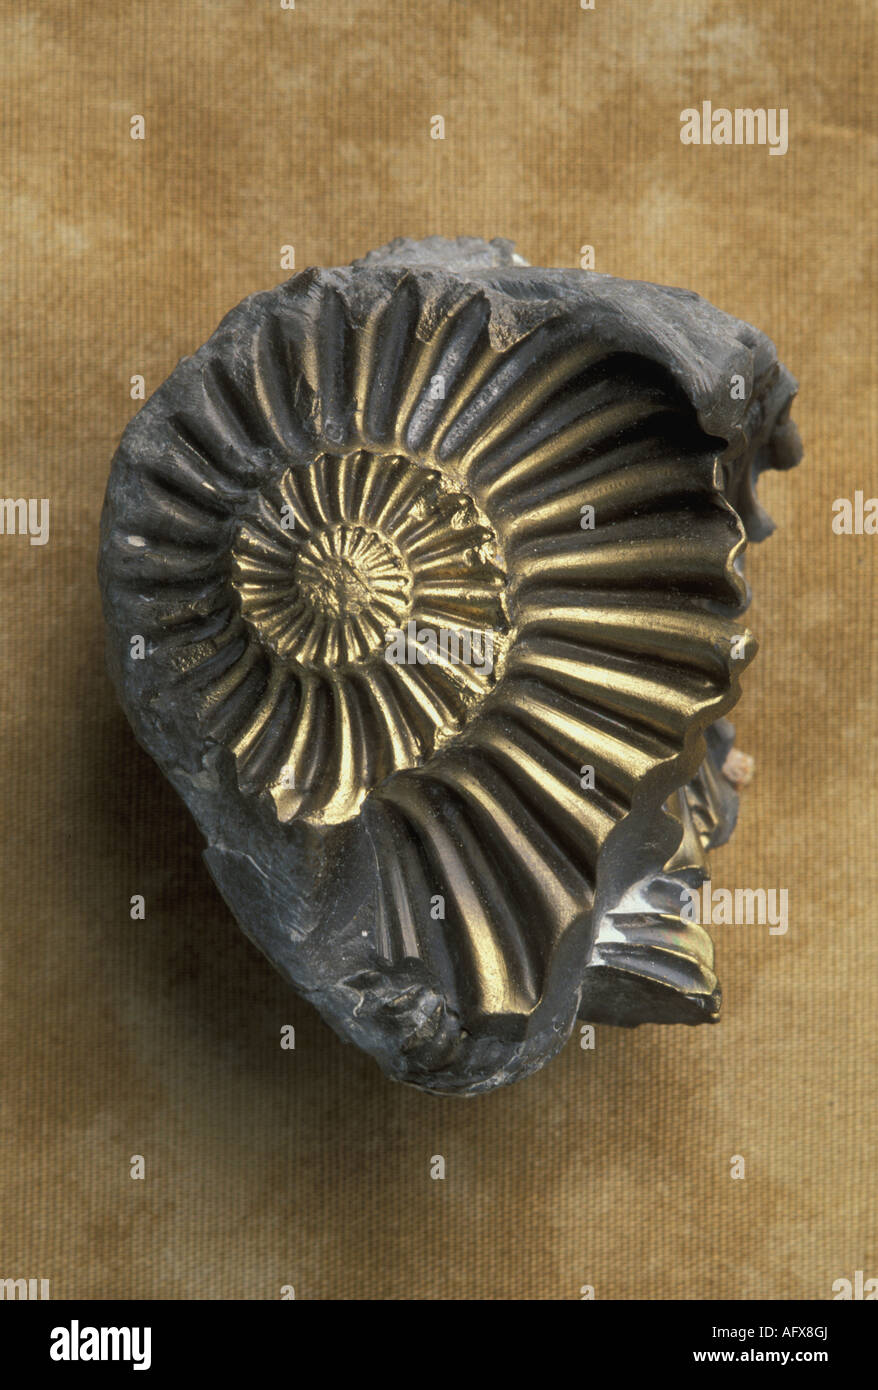 Pyrite Replacement in Fossil Ammonite, by Mark A. Schneider/Dembinsky Photo Assoc Stock Photo